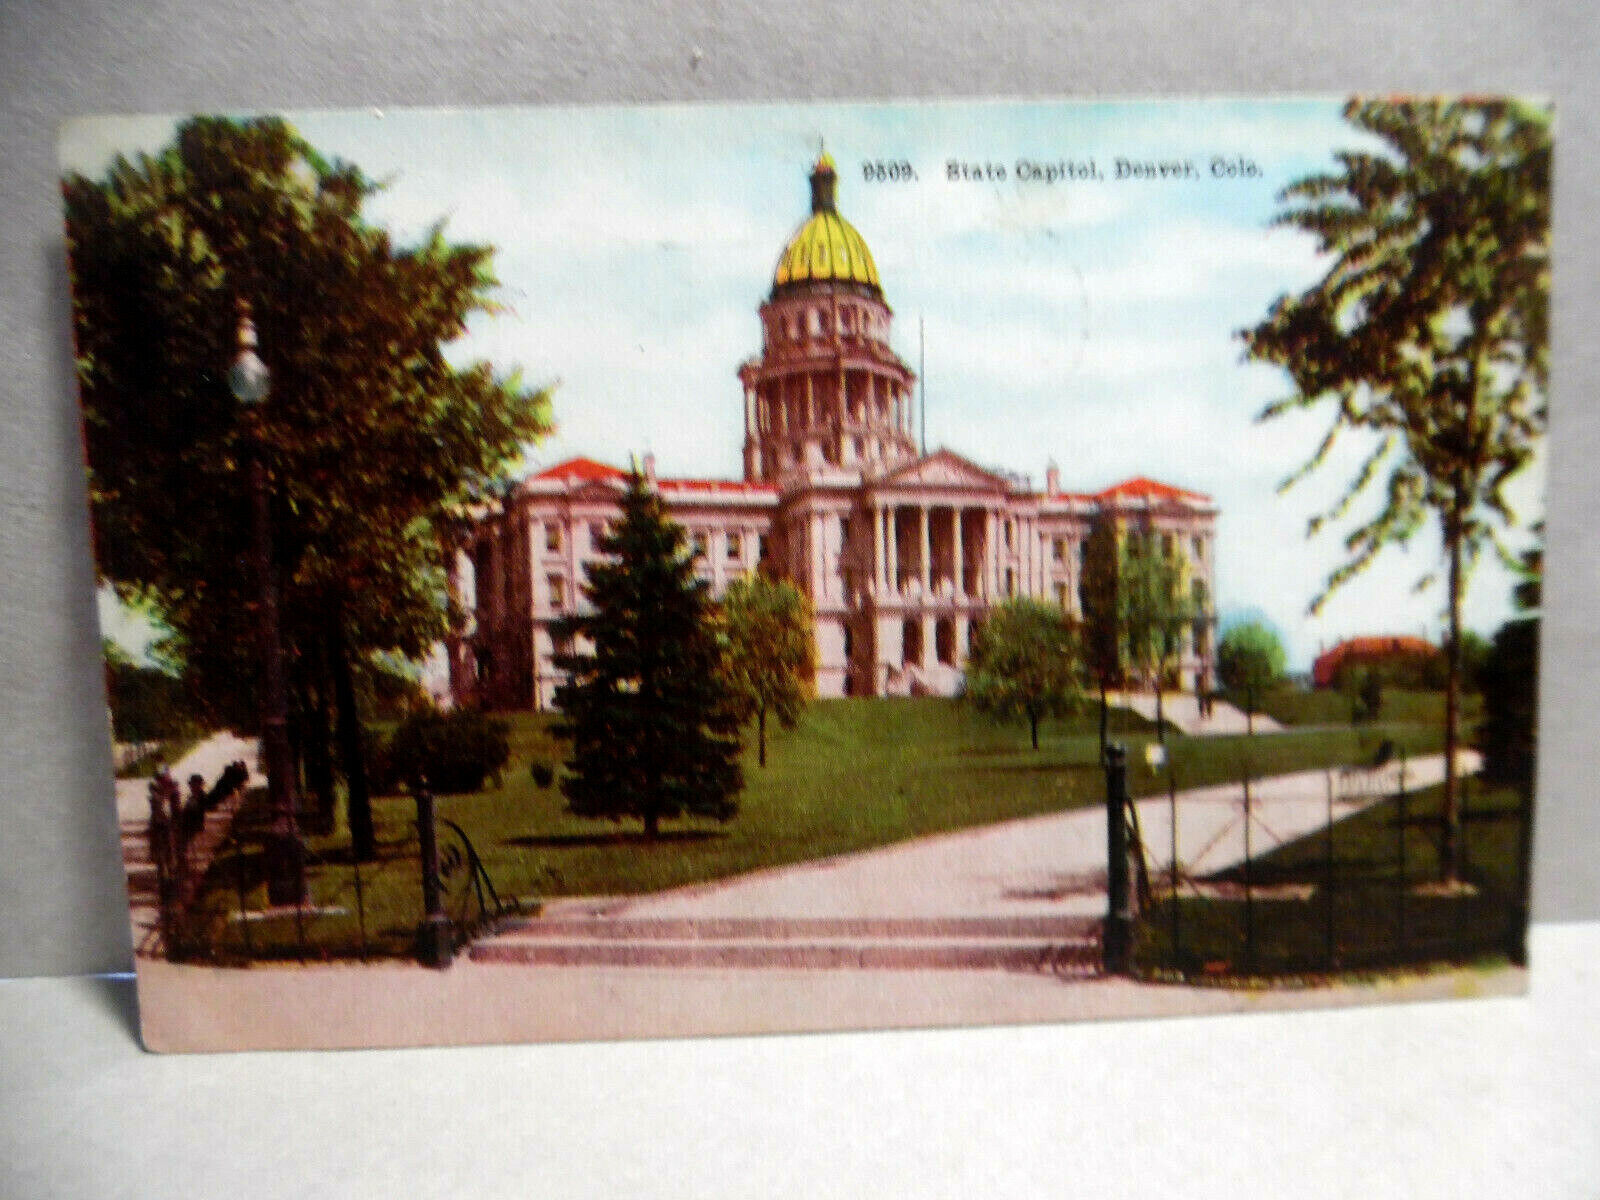 PC 6066 - POSTCARD VIEW OF THE STATE CAPITOL IN DENVER, COLORADO